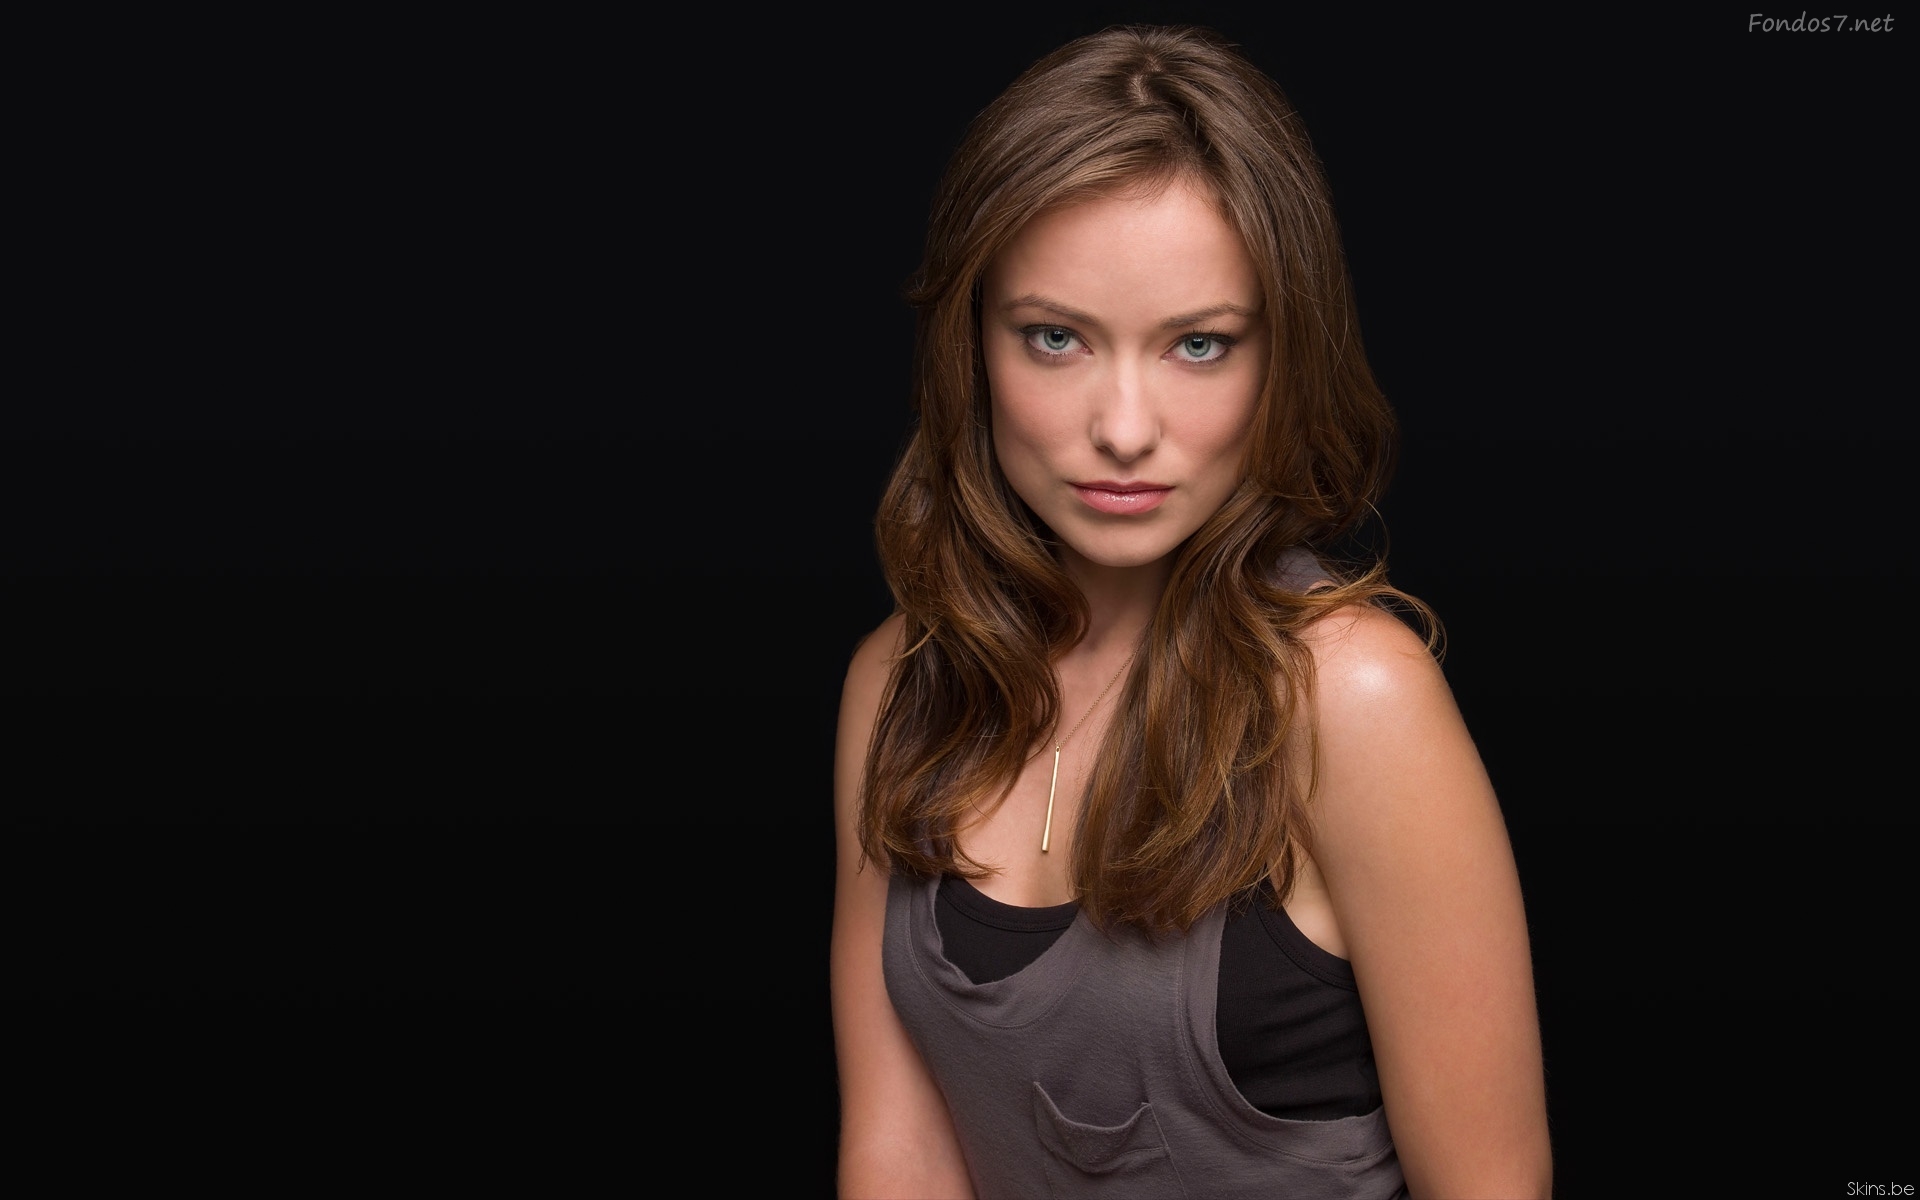 Tags Olivia Wilde Date Resolution Avg